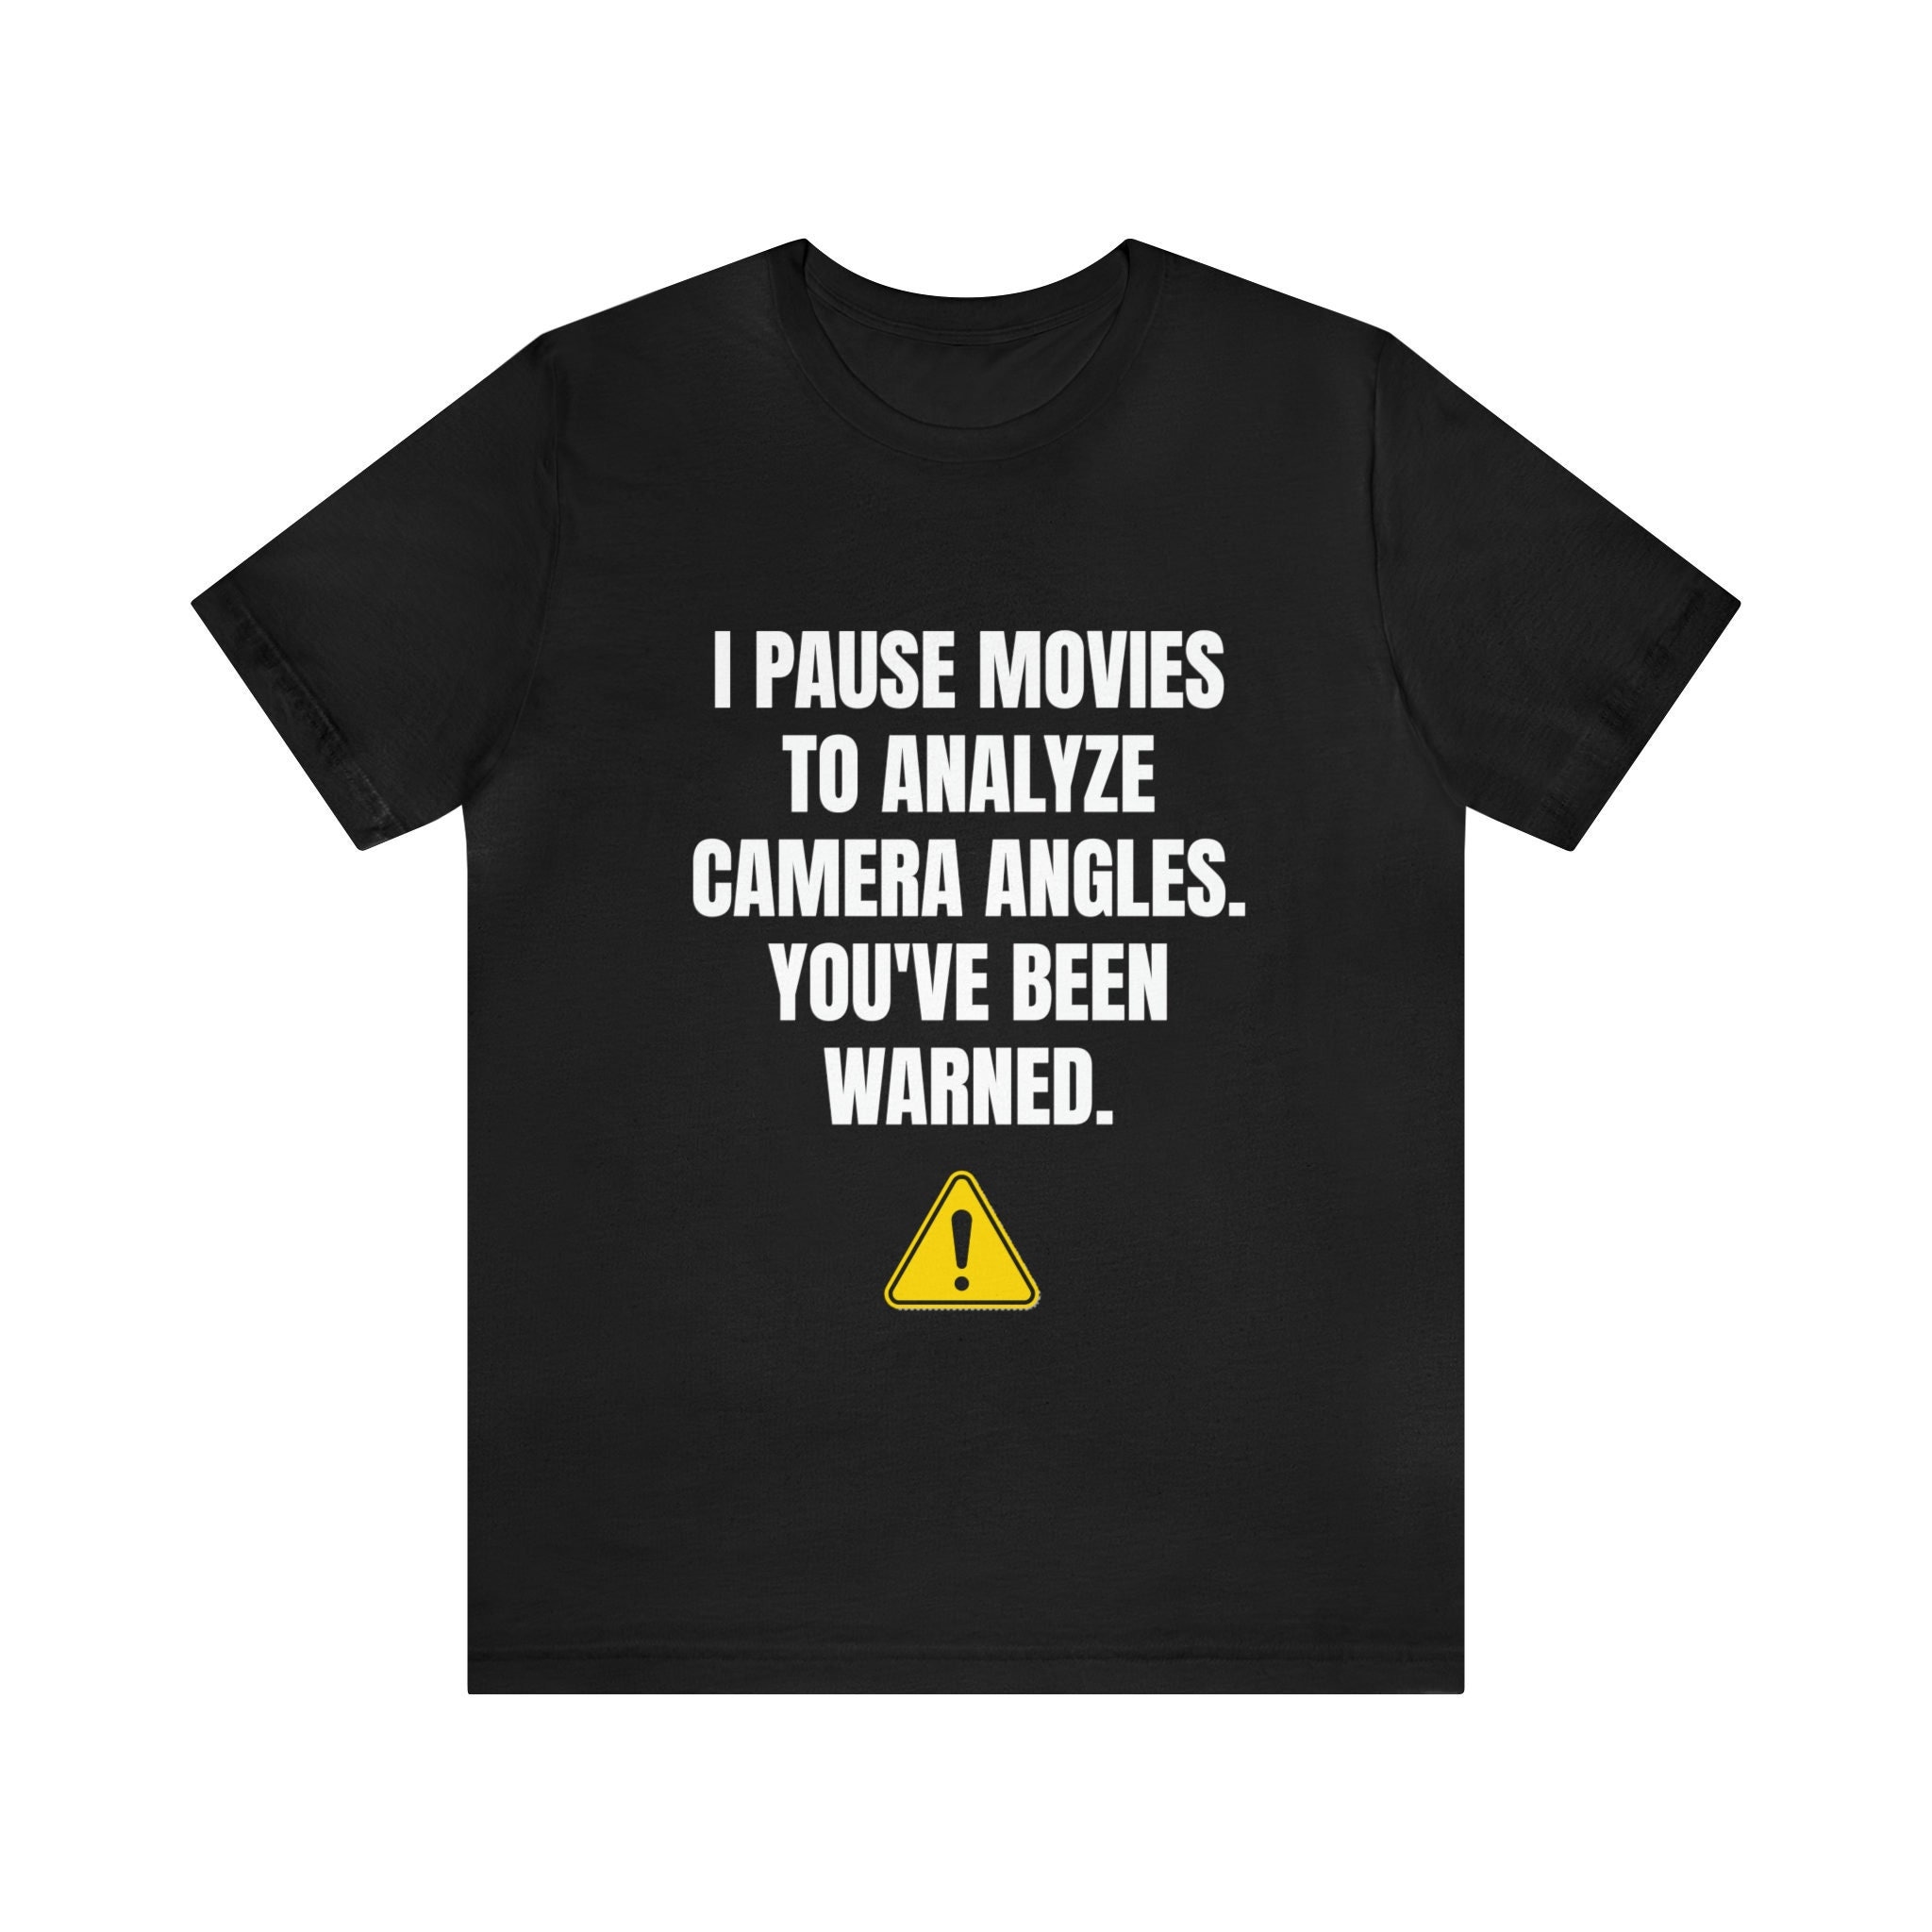 I made that Funny Mans T-shirts into Roblox : r/willwood